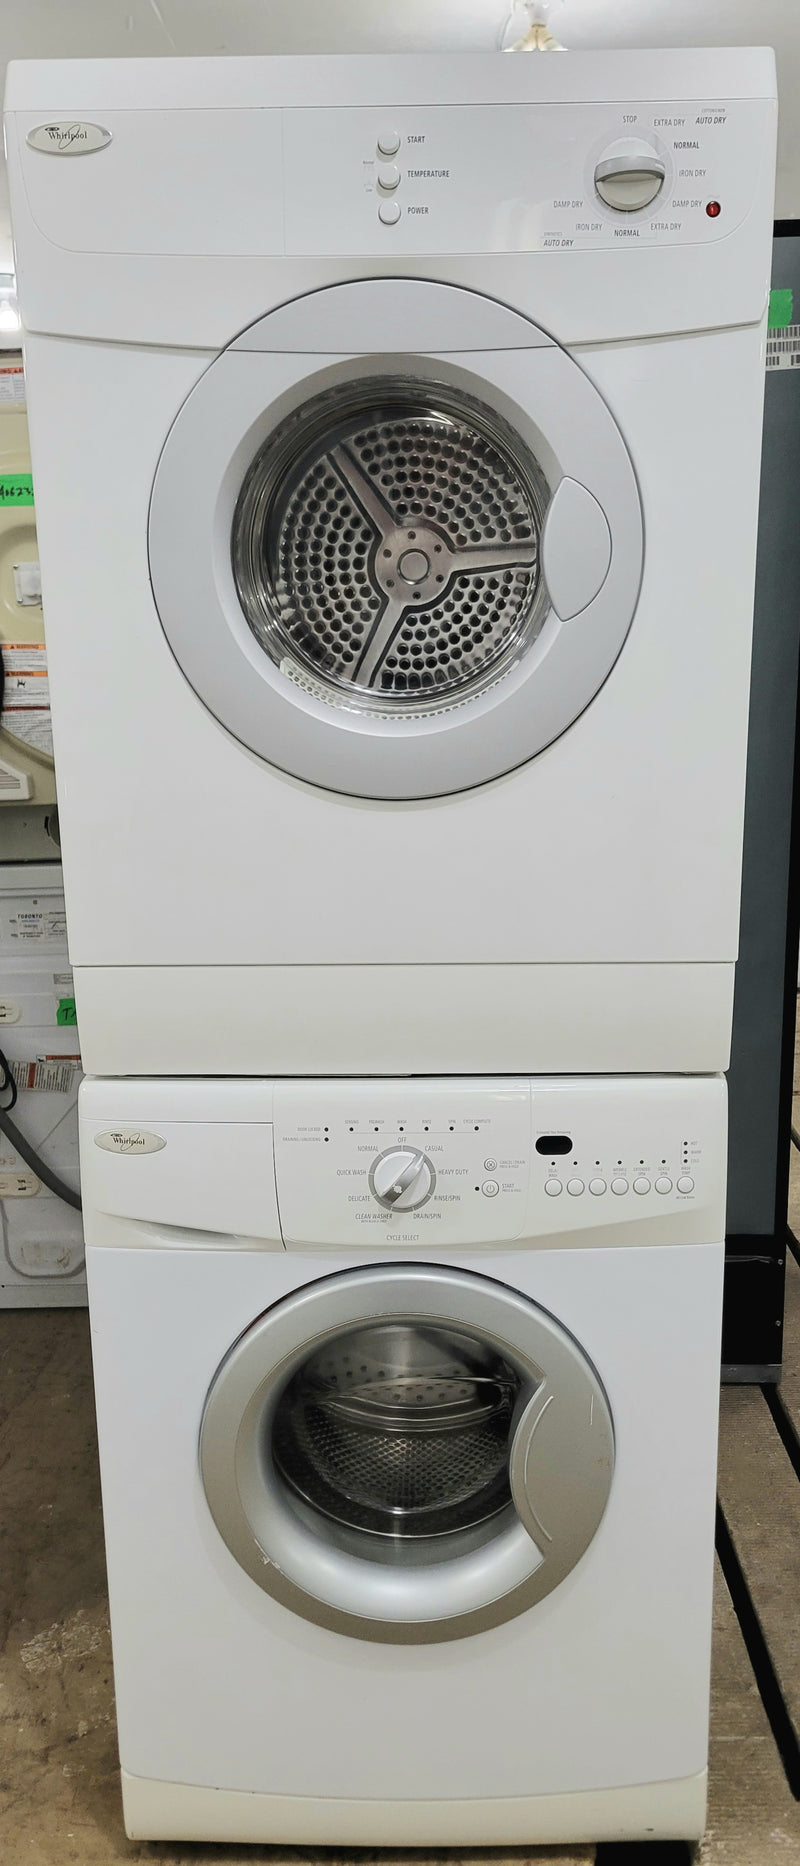 Whirlpool 24" Wide Apartment Size Matching Stackable Washer and Dryer Set, Free 60 Day Warranty